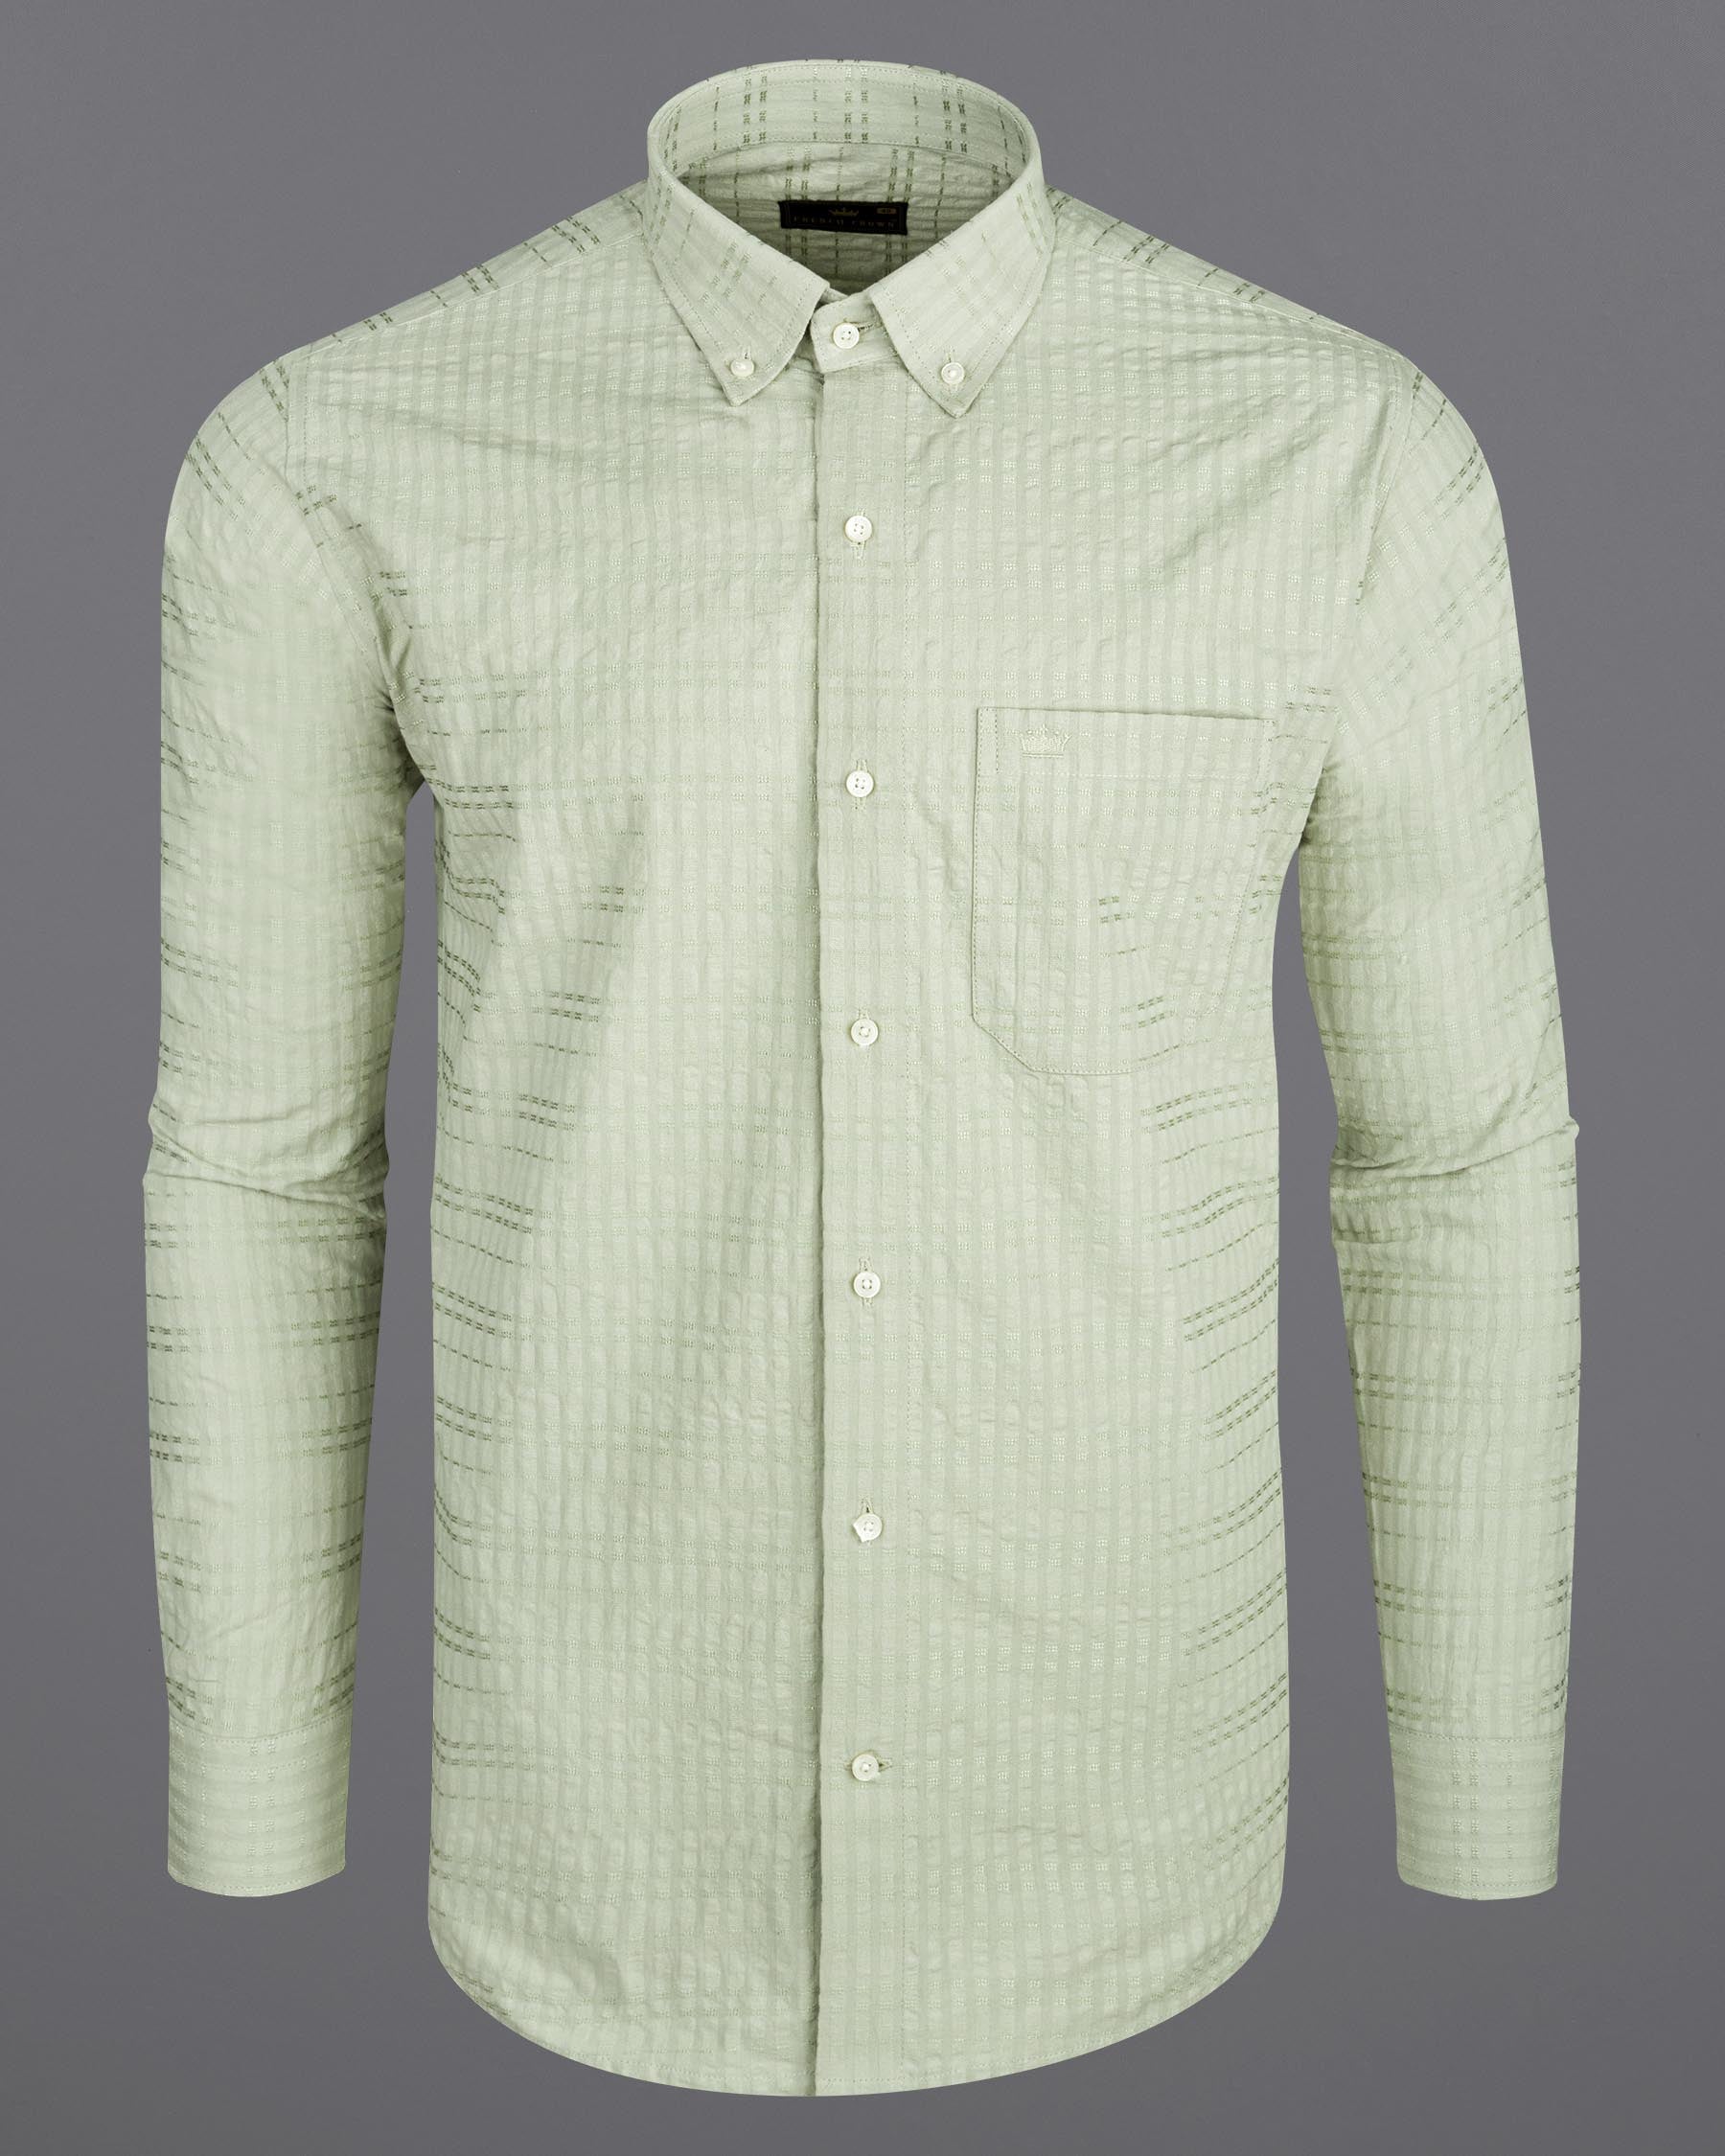 Pearl Bush with Pale Oyster Striped Seersucker Giza Cotton Shirt 7013-BD-38,7013-BD-38,7013-BD-39,7013-BD-39,7013-BD-40,7013-BD-40,7013-BD-42,7013-BD-42,7013-BD-44,7013-BD-44,7013-BD-46,7013-BD-46,7013-BD-48,7013-BD-48,7013-BD-50,7013-BD-50,7013-BD-52,7013-BD-52